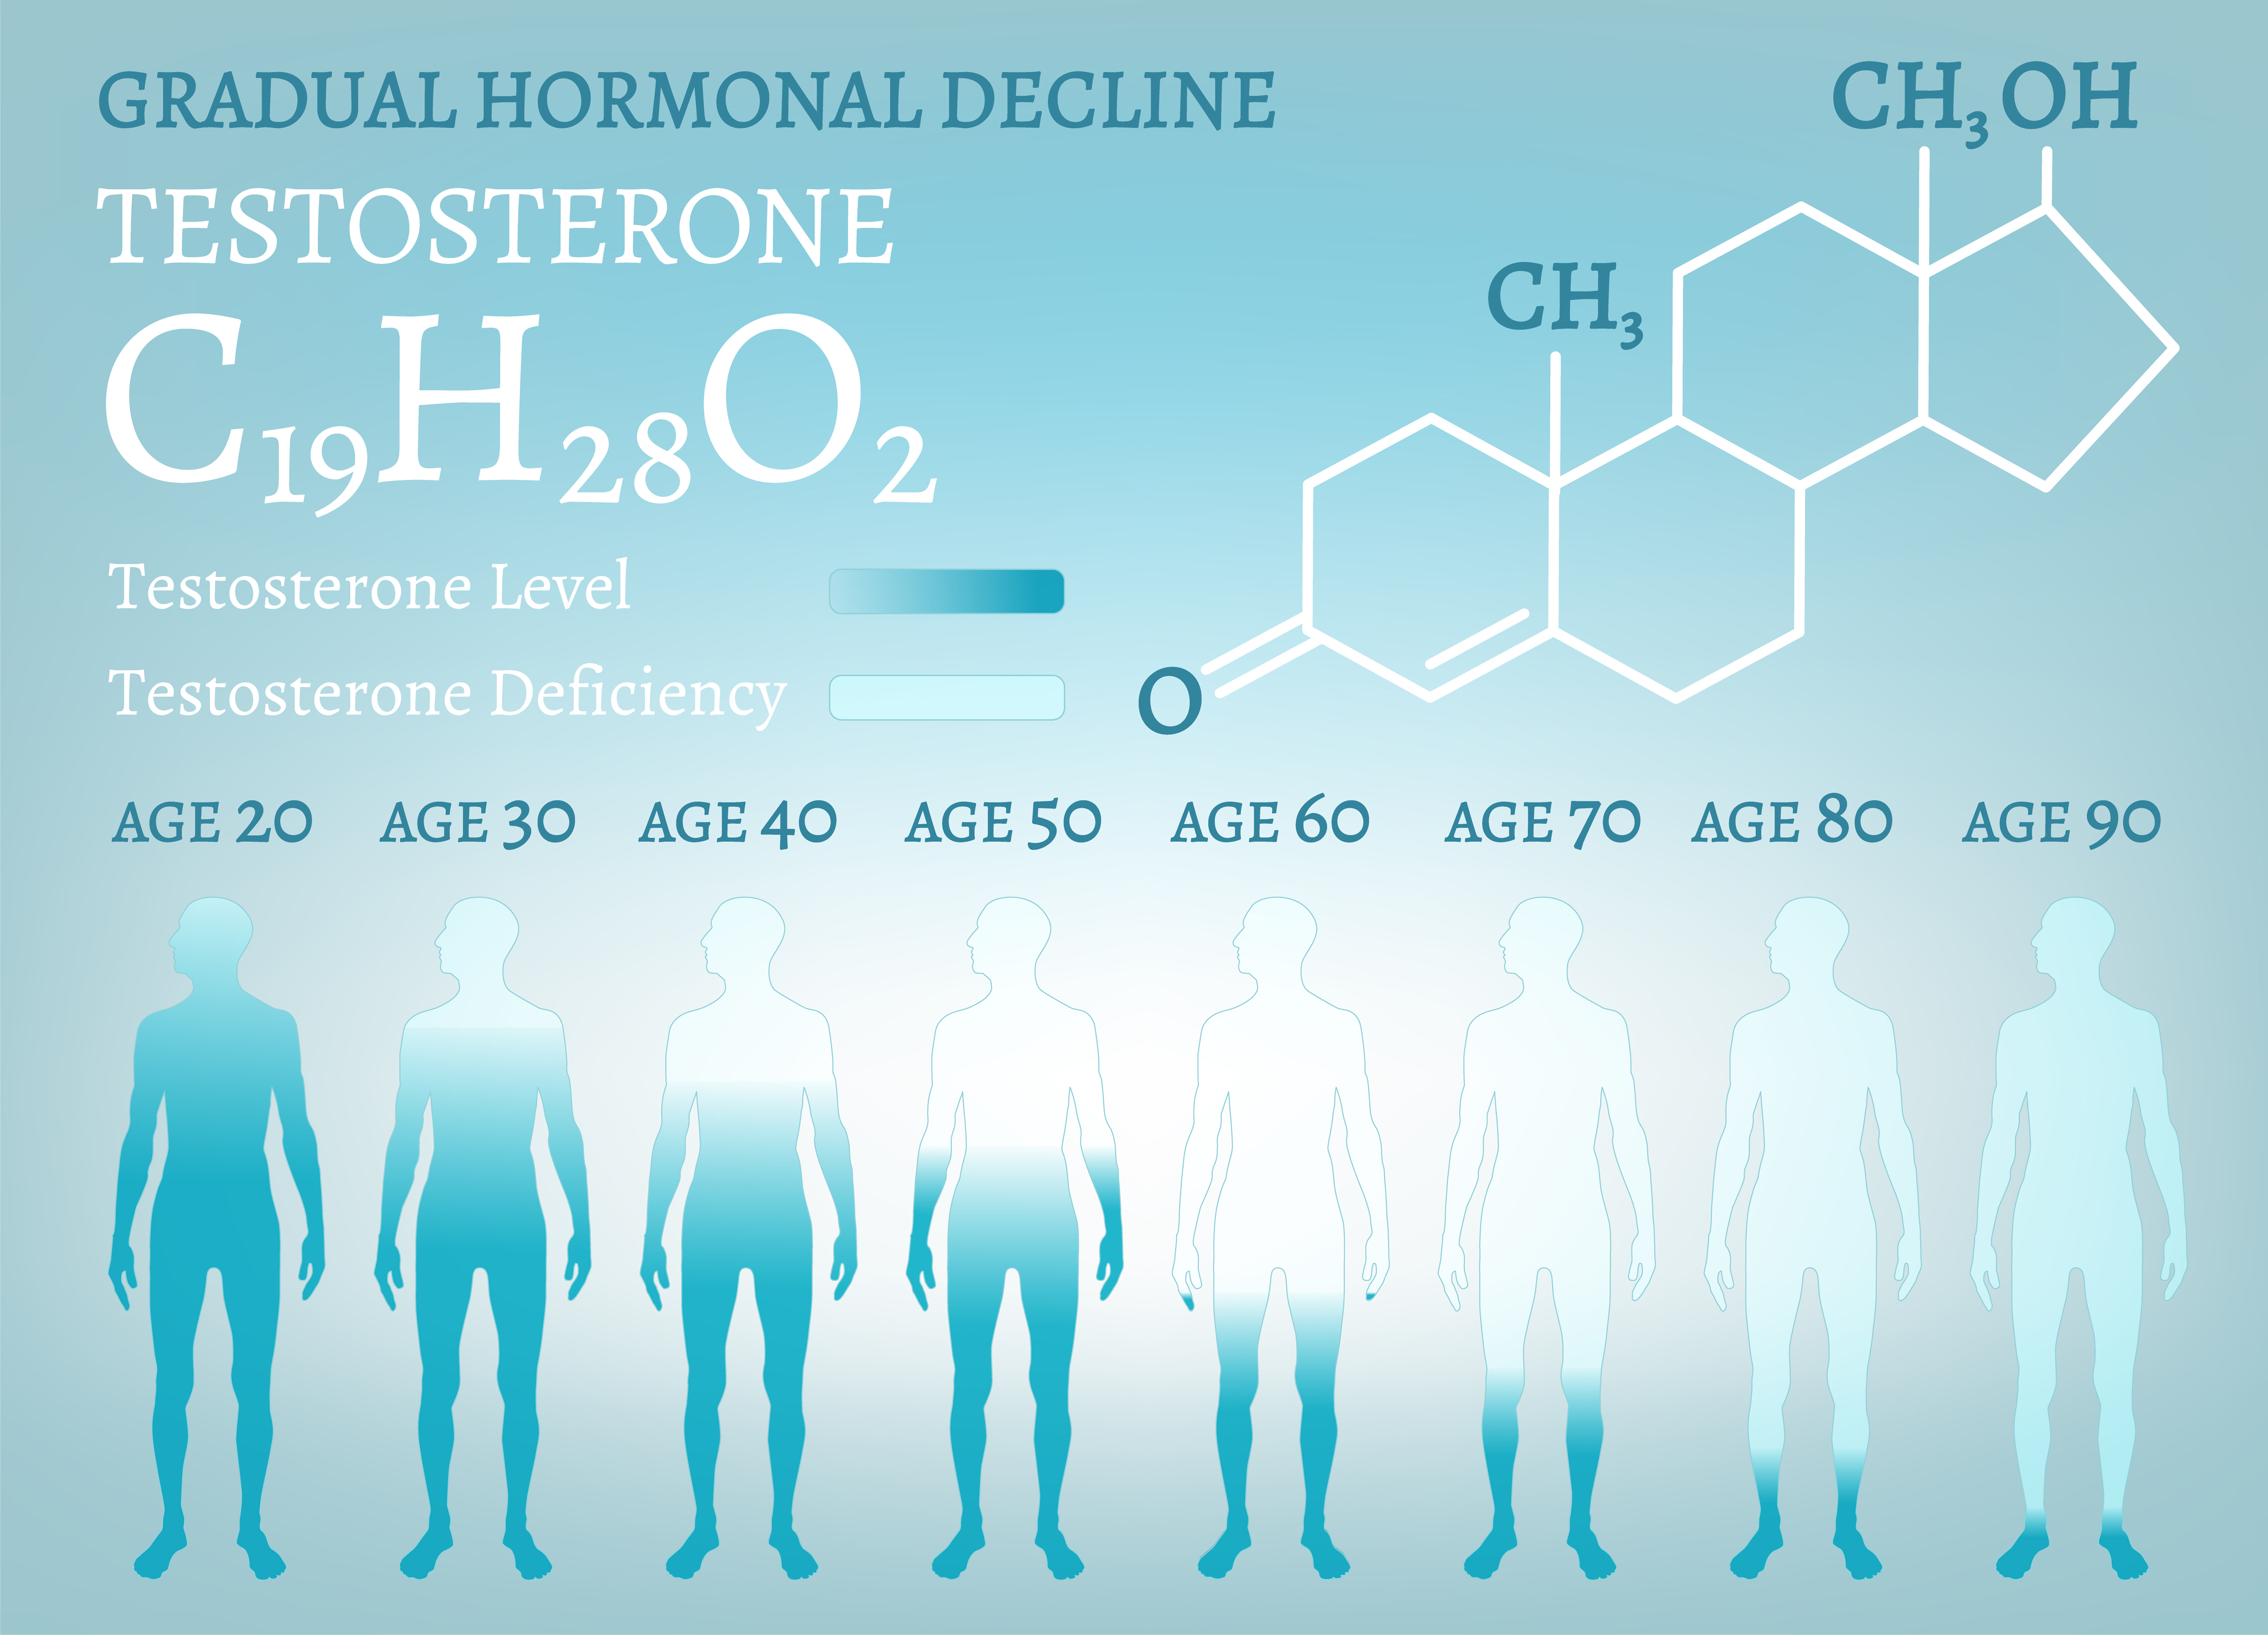 Testosterone level decreases with age.